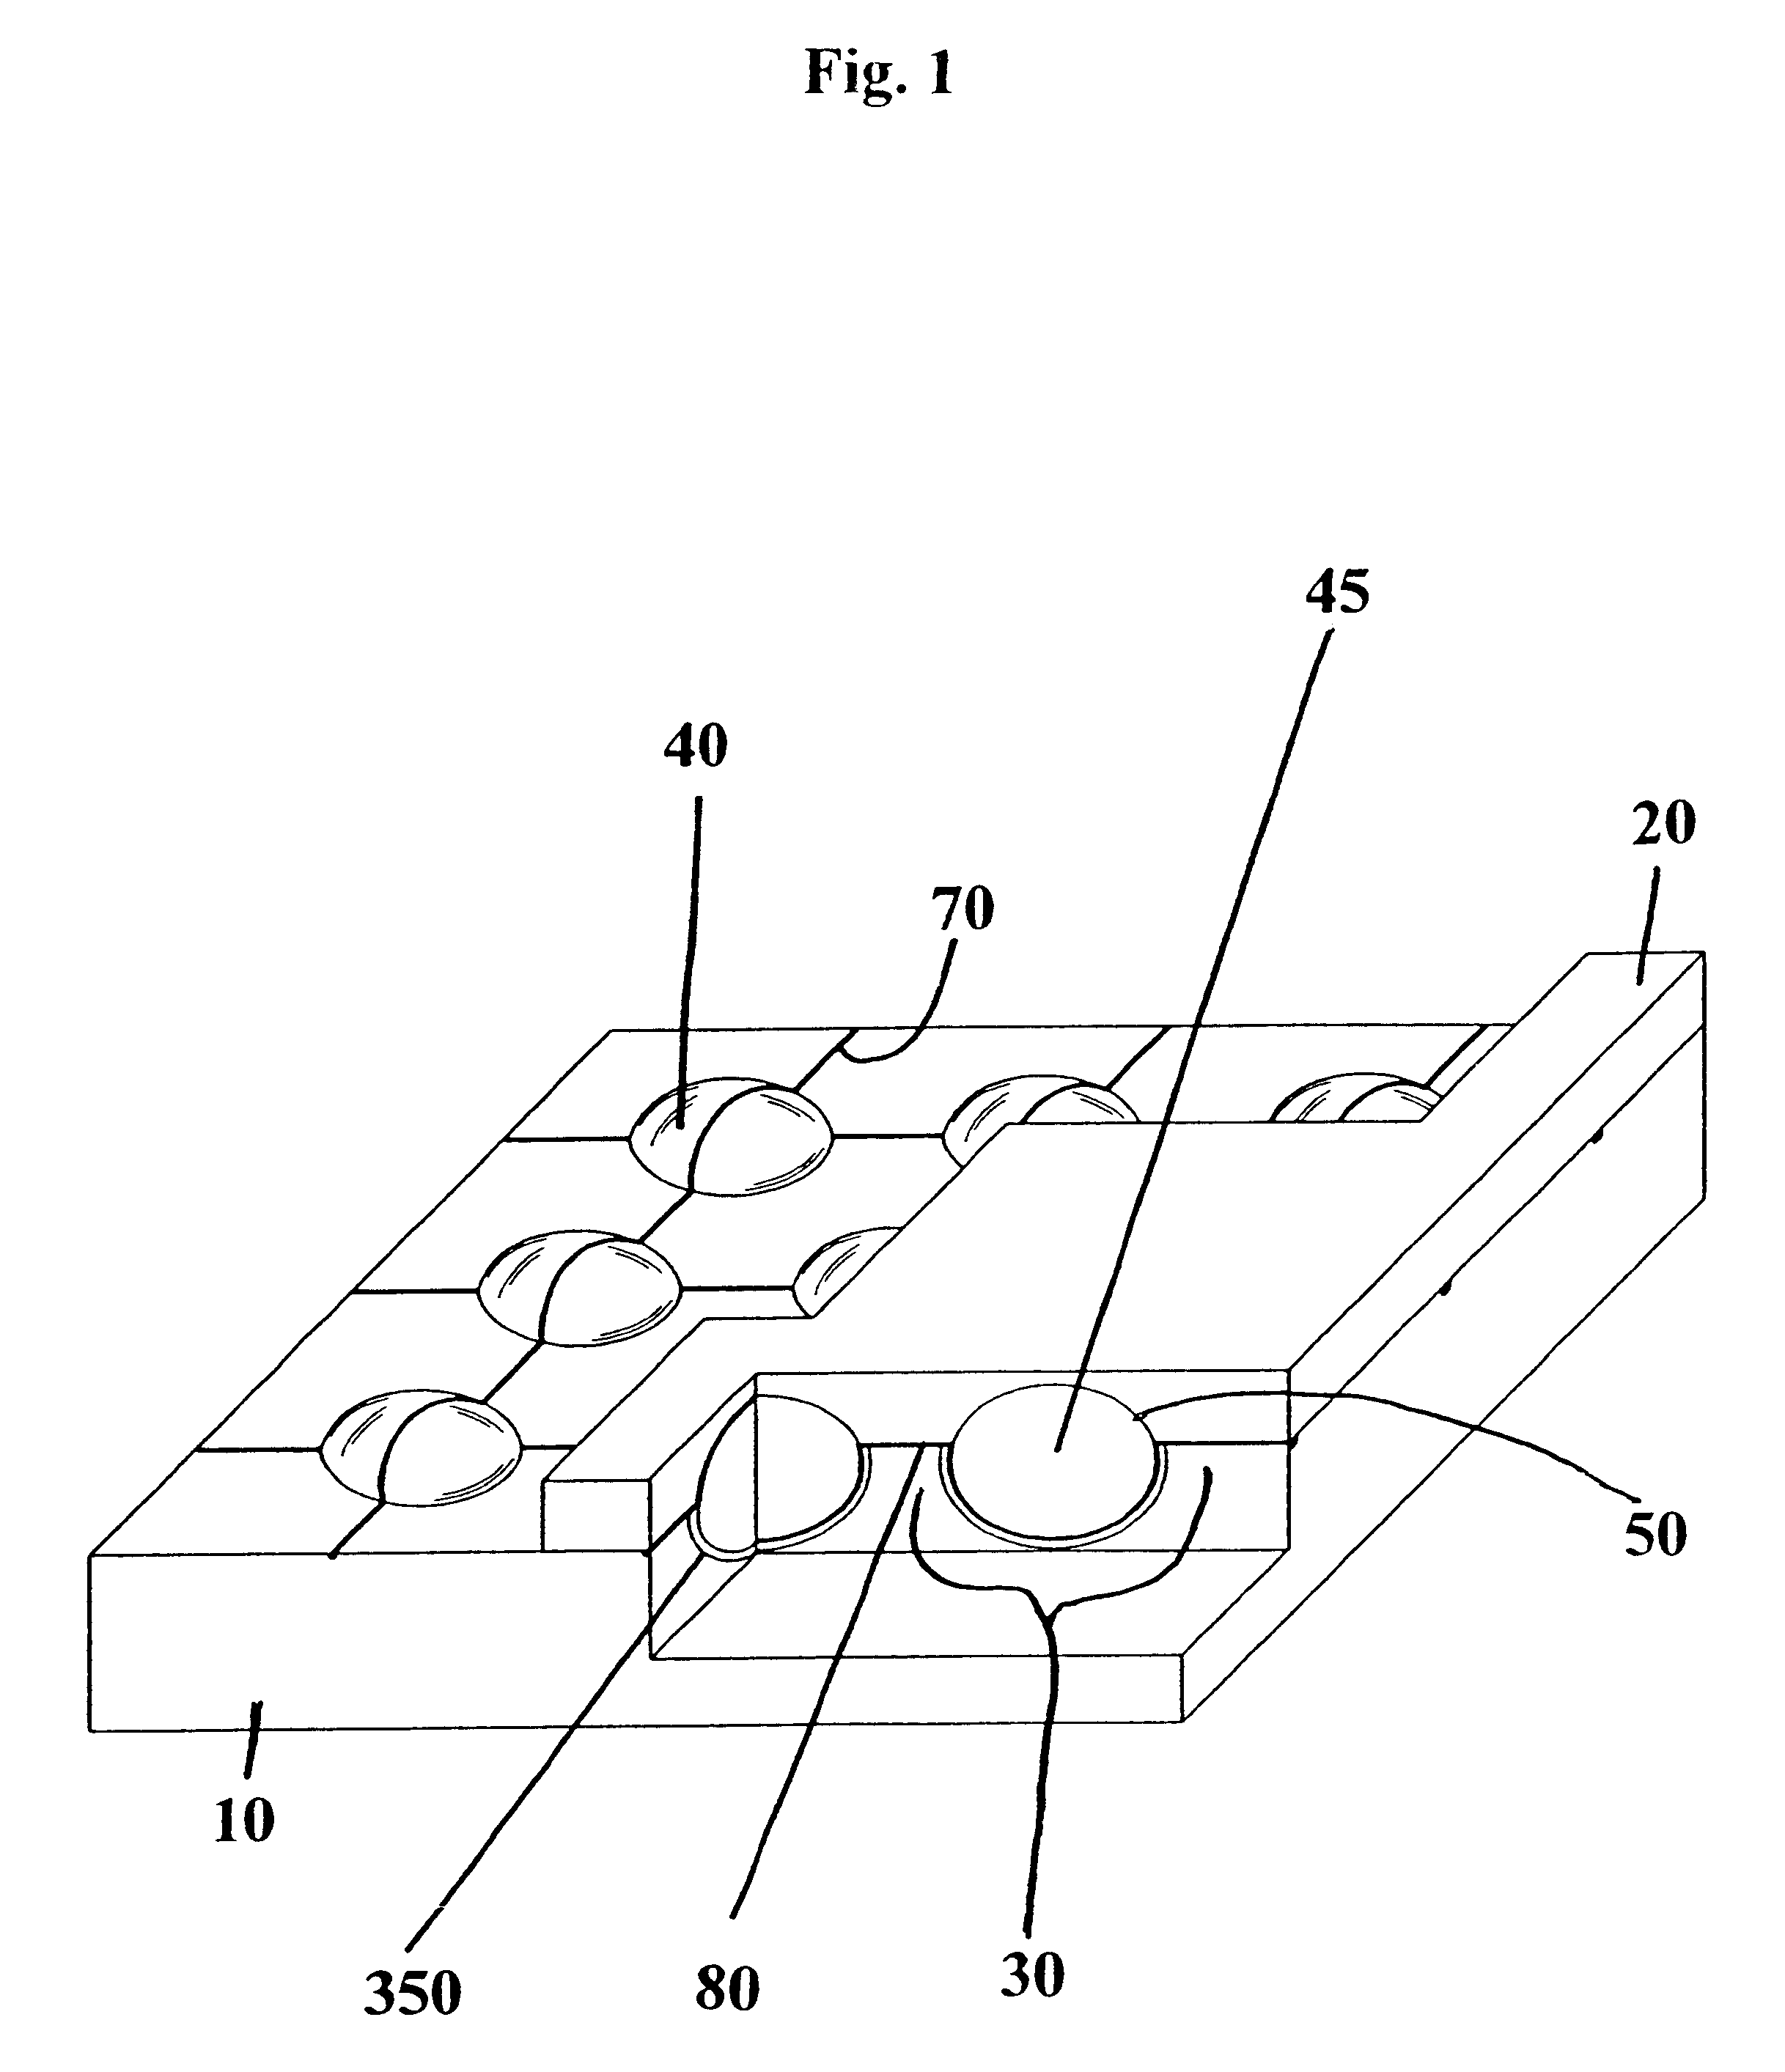 Method for testing a light-emitting panel and the components therein